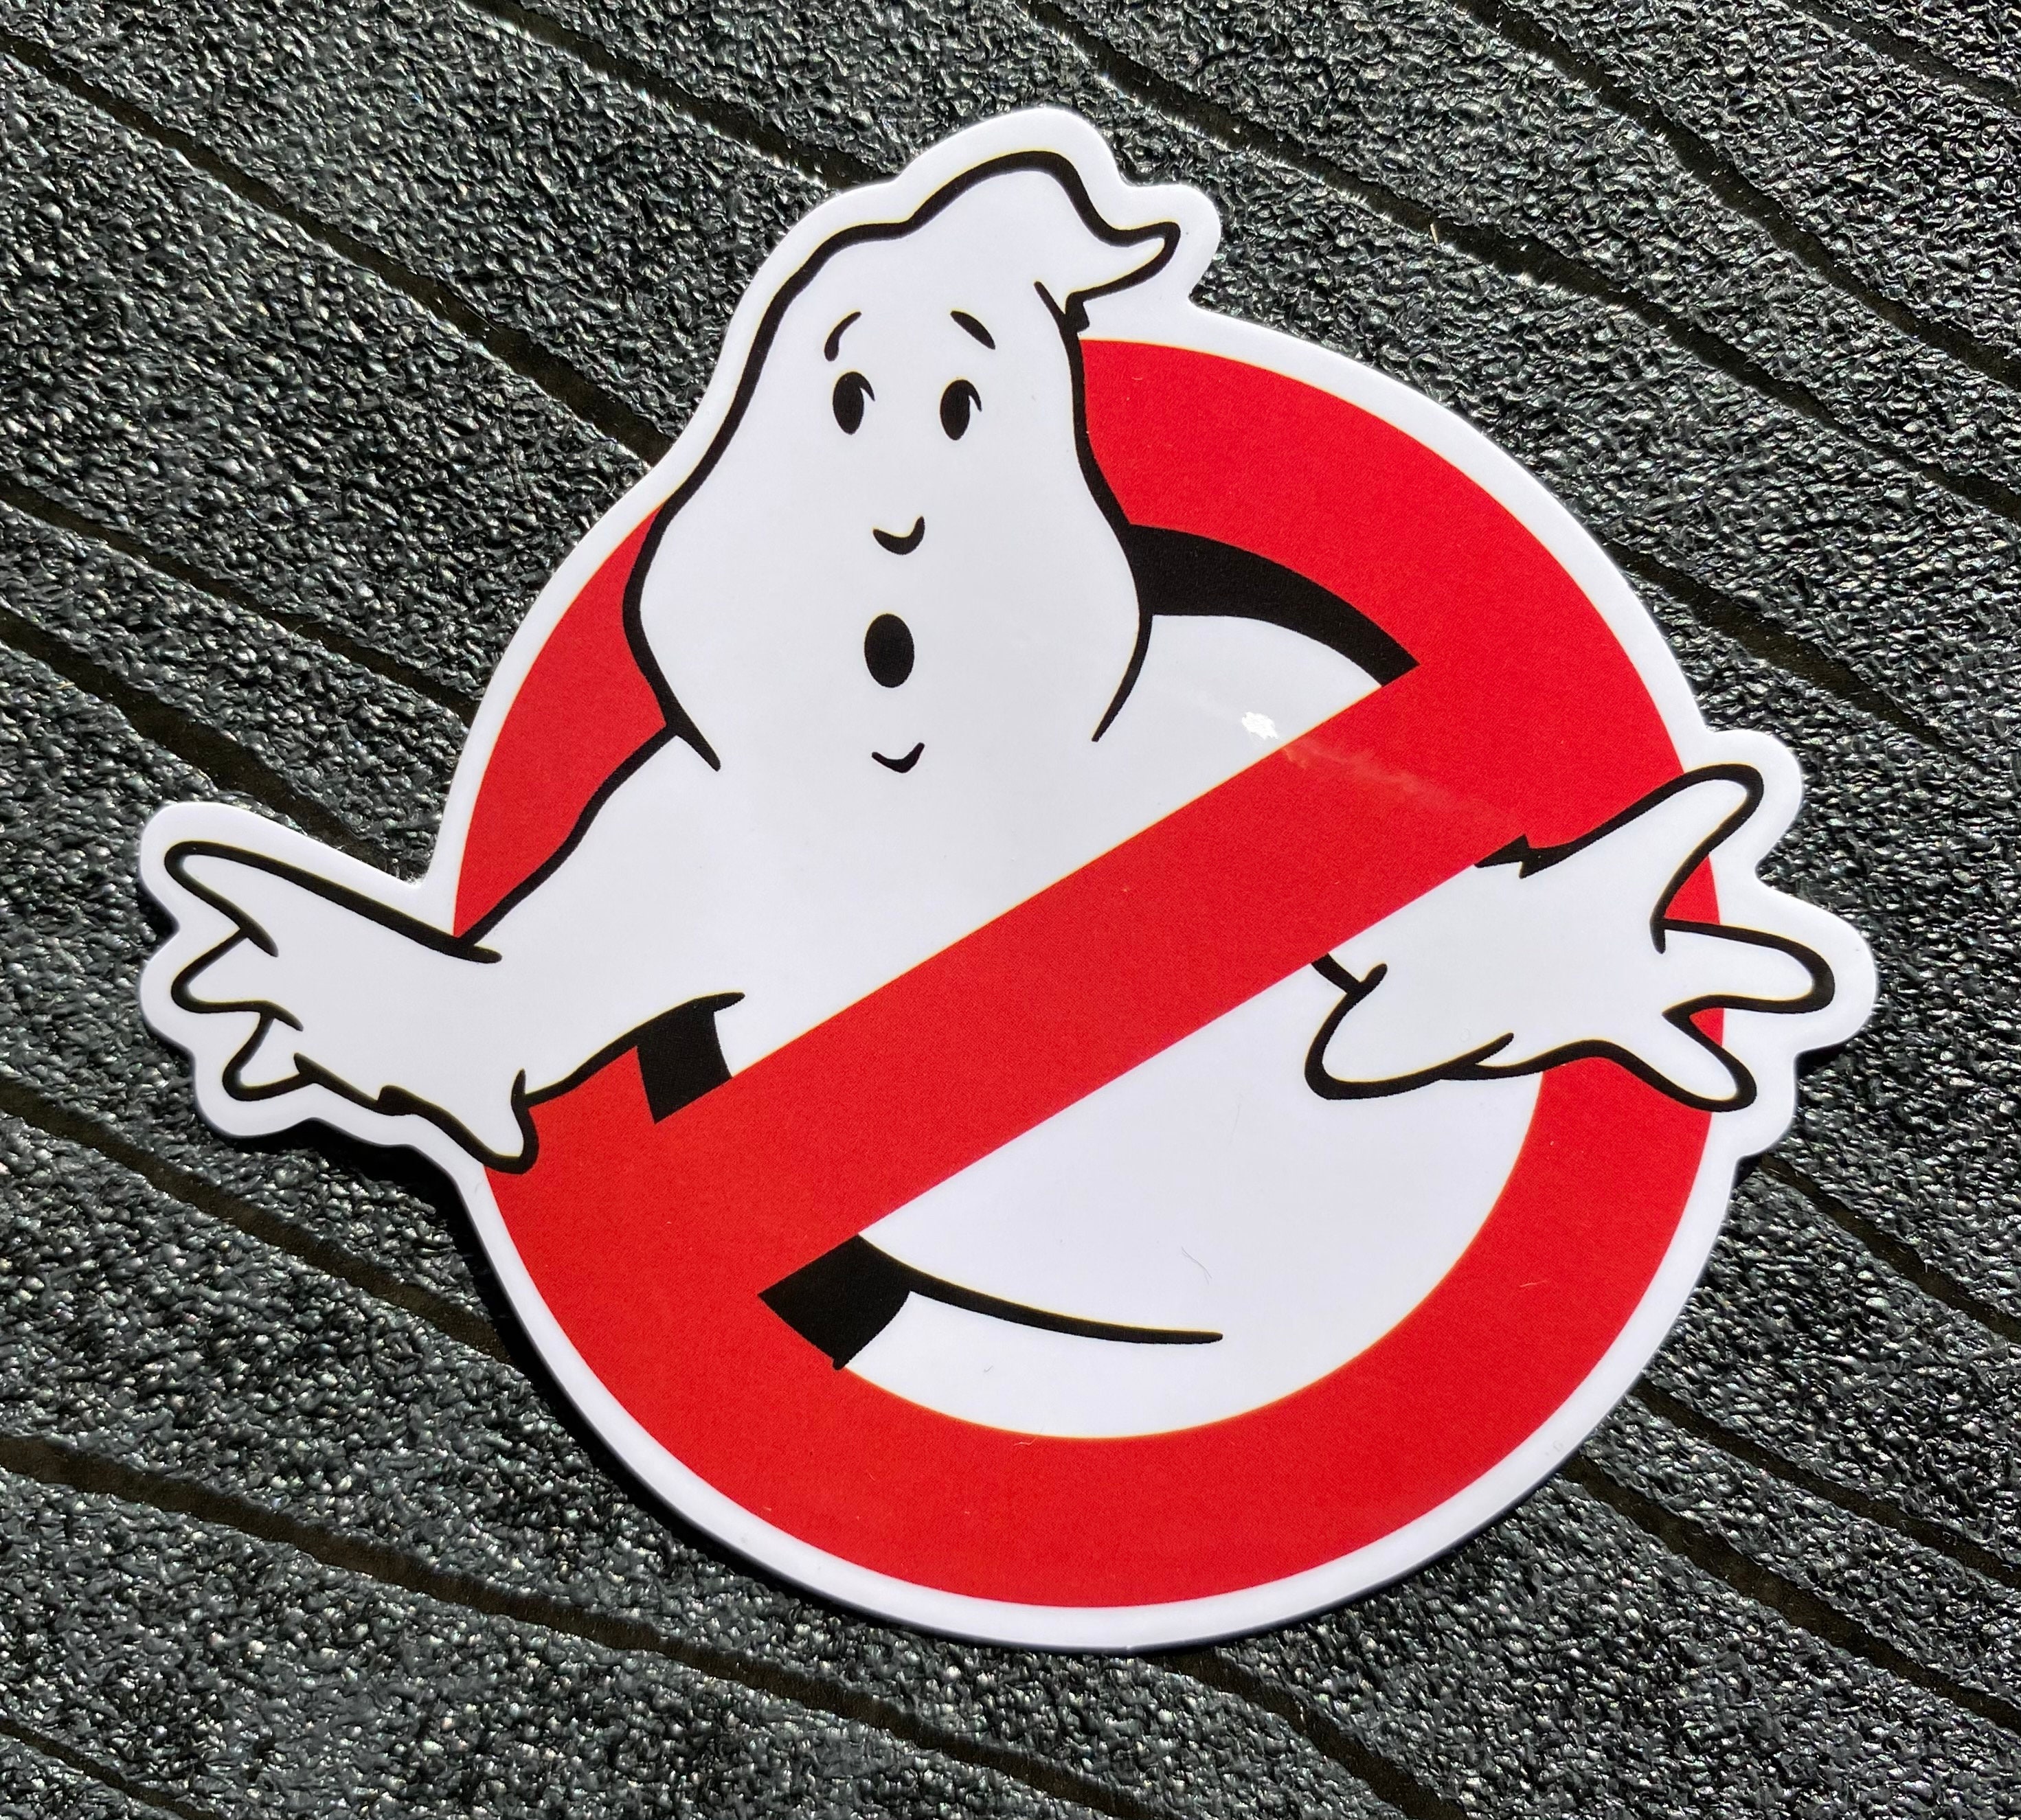 Ghostbusters Album stickers Complete To Paste from Argentina